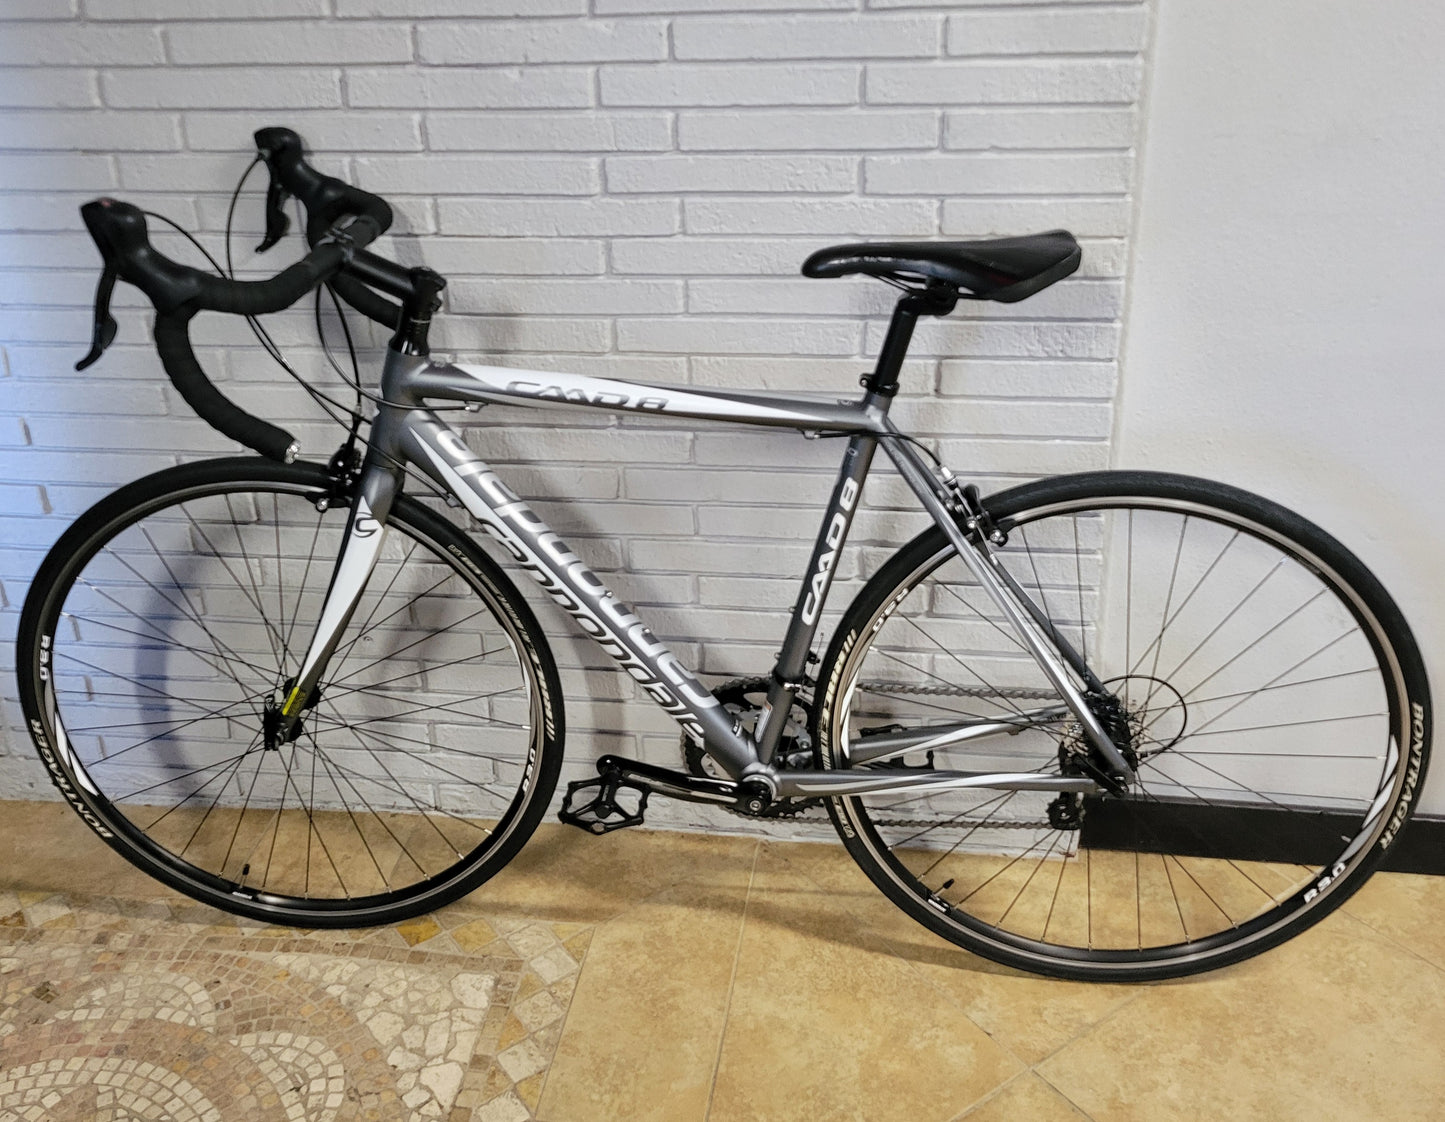 Cannondale Caad8 7 (51cm Small) Road Bike